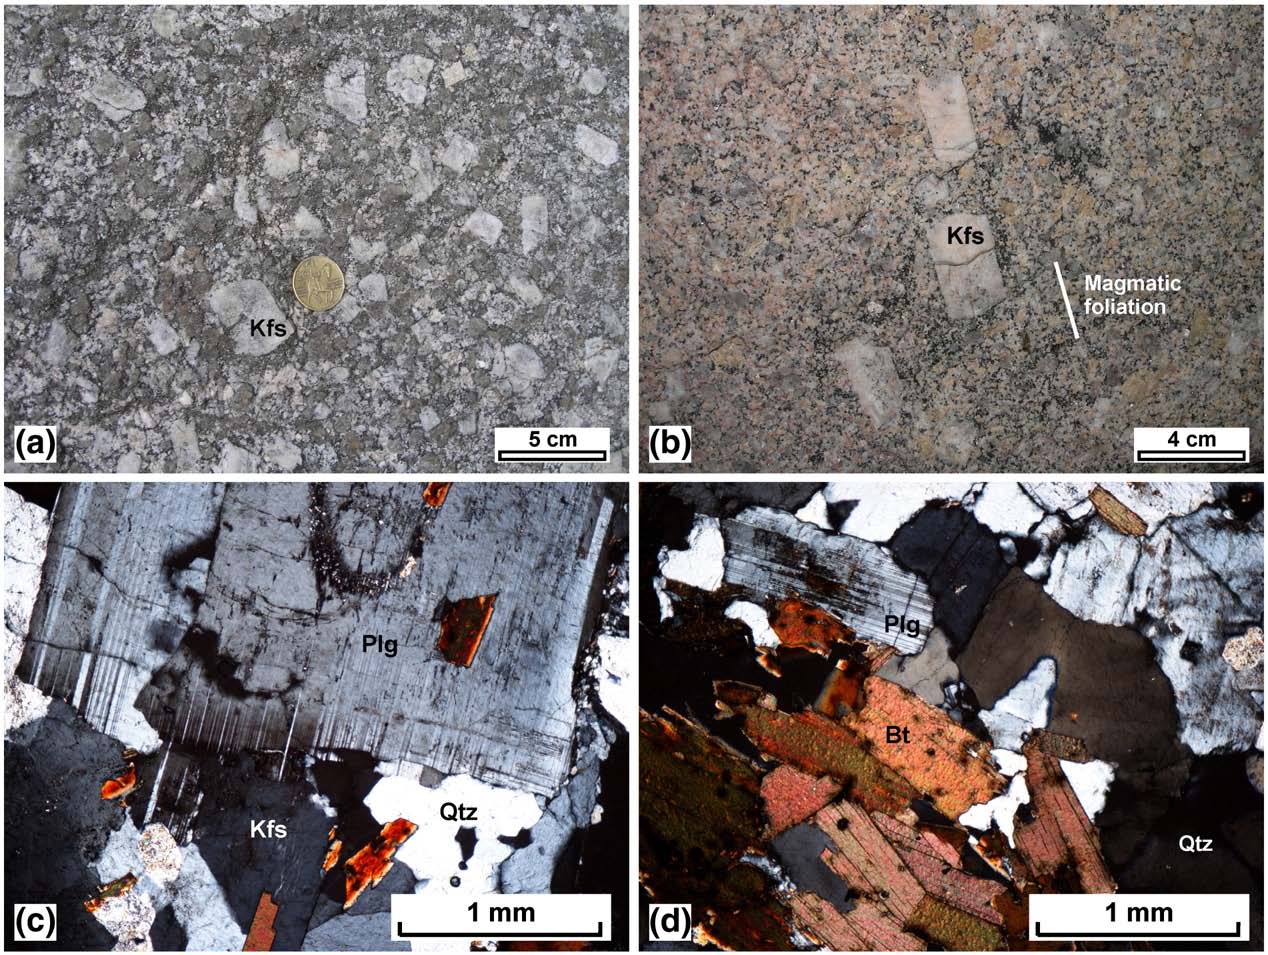 J. Trubač et al. / Journal of Volcanology and Geothermal Research 181 (2009) 25 34 27 The pluton consists of three distinct granite varieties (Fig.